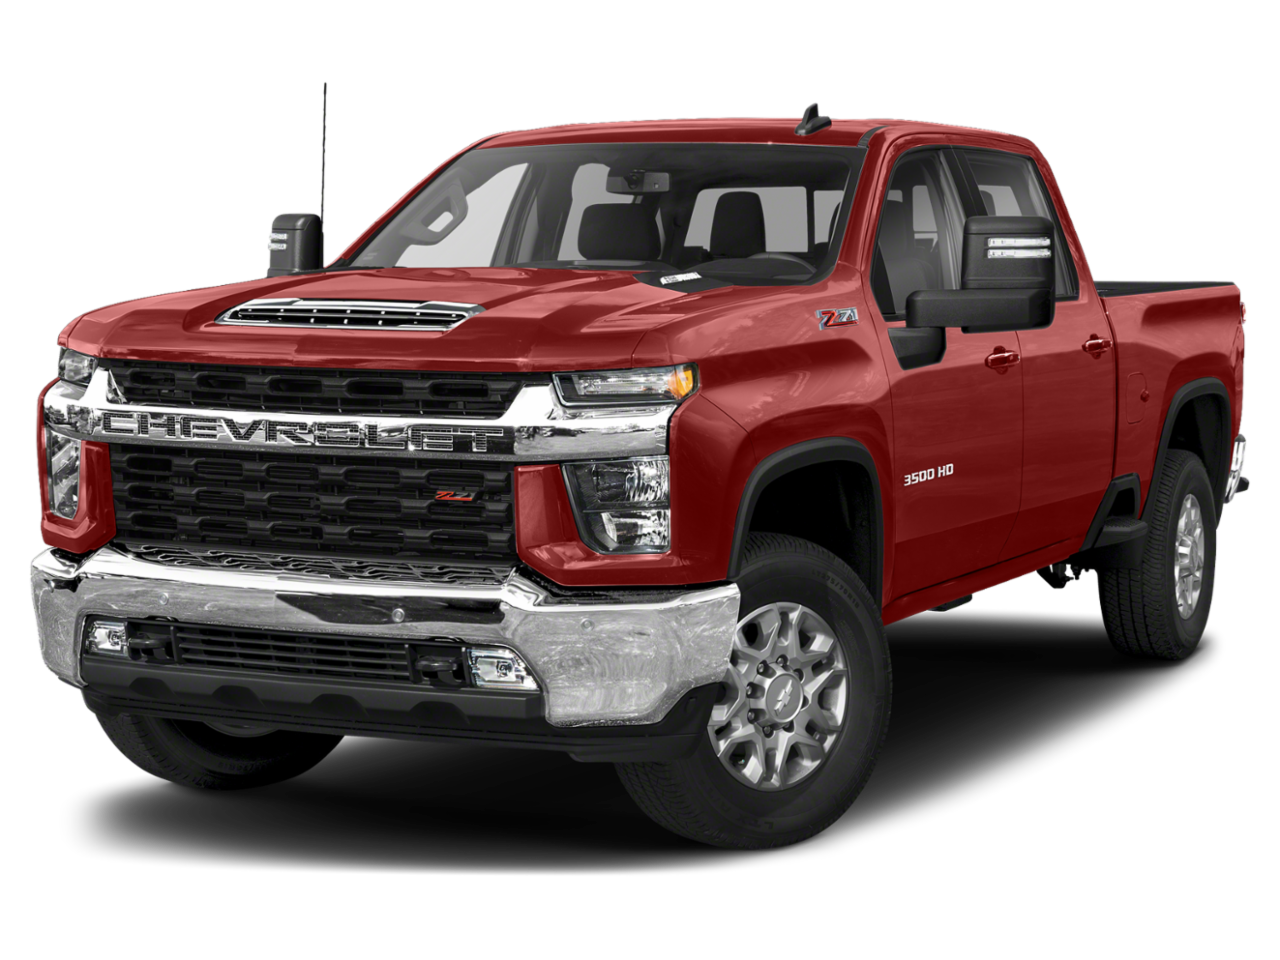 New 2020 Chevrolet Silverado 3500 HD from your Anchorage, AK dealership